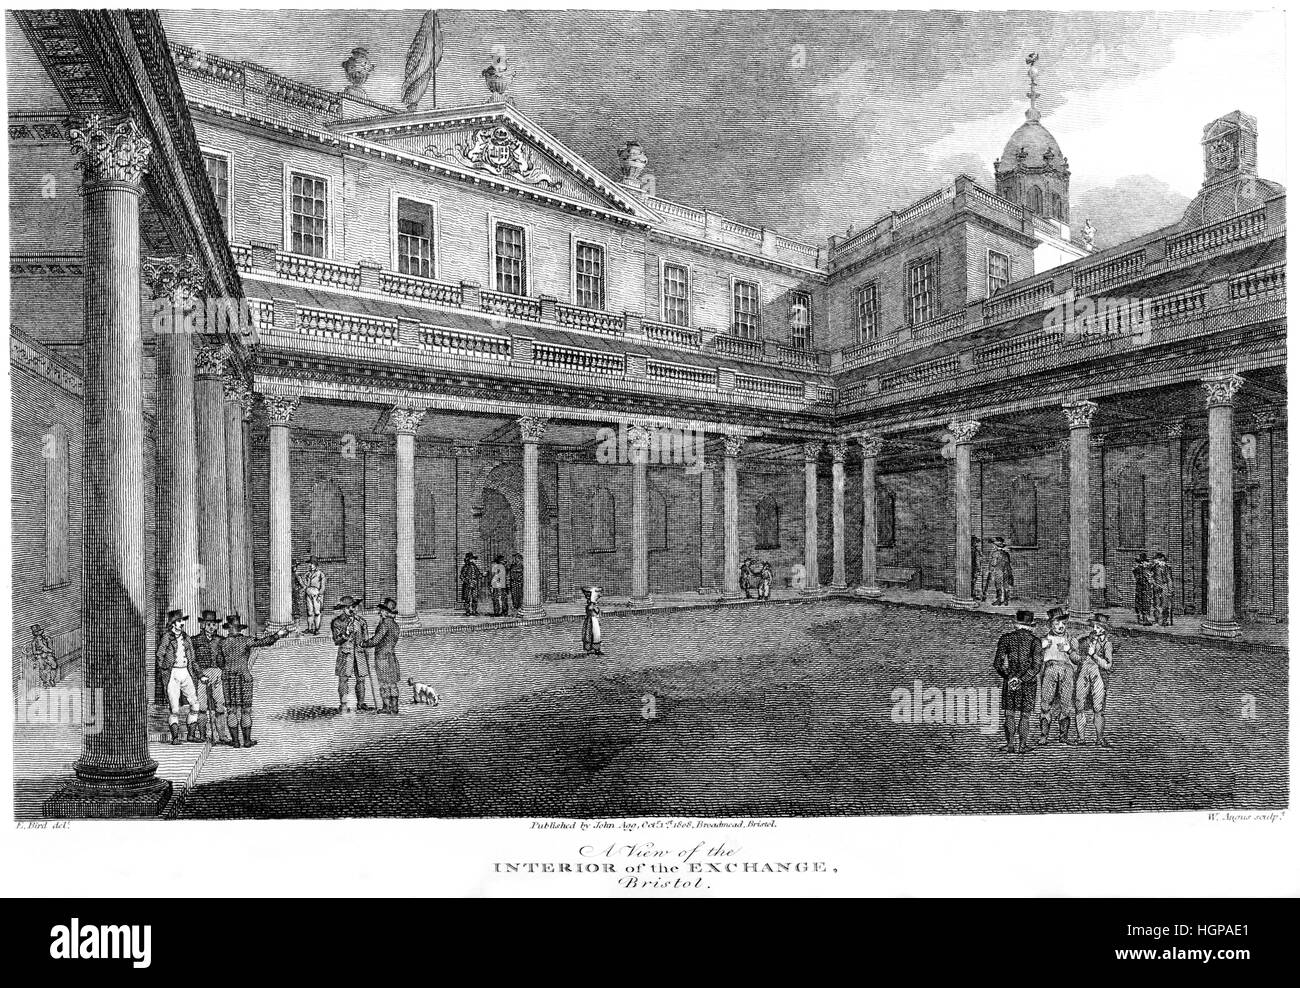 An engraving of A View of the Interior of the Exchange, Bristol in 1808 scanned at high resolution from a book printed in 1816. Stock Photo